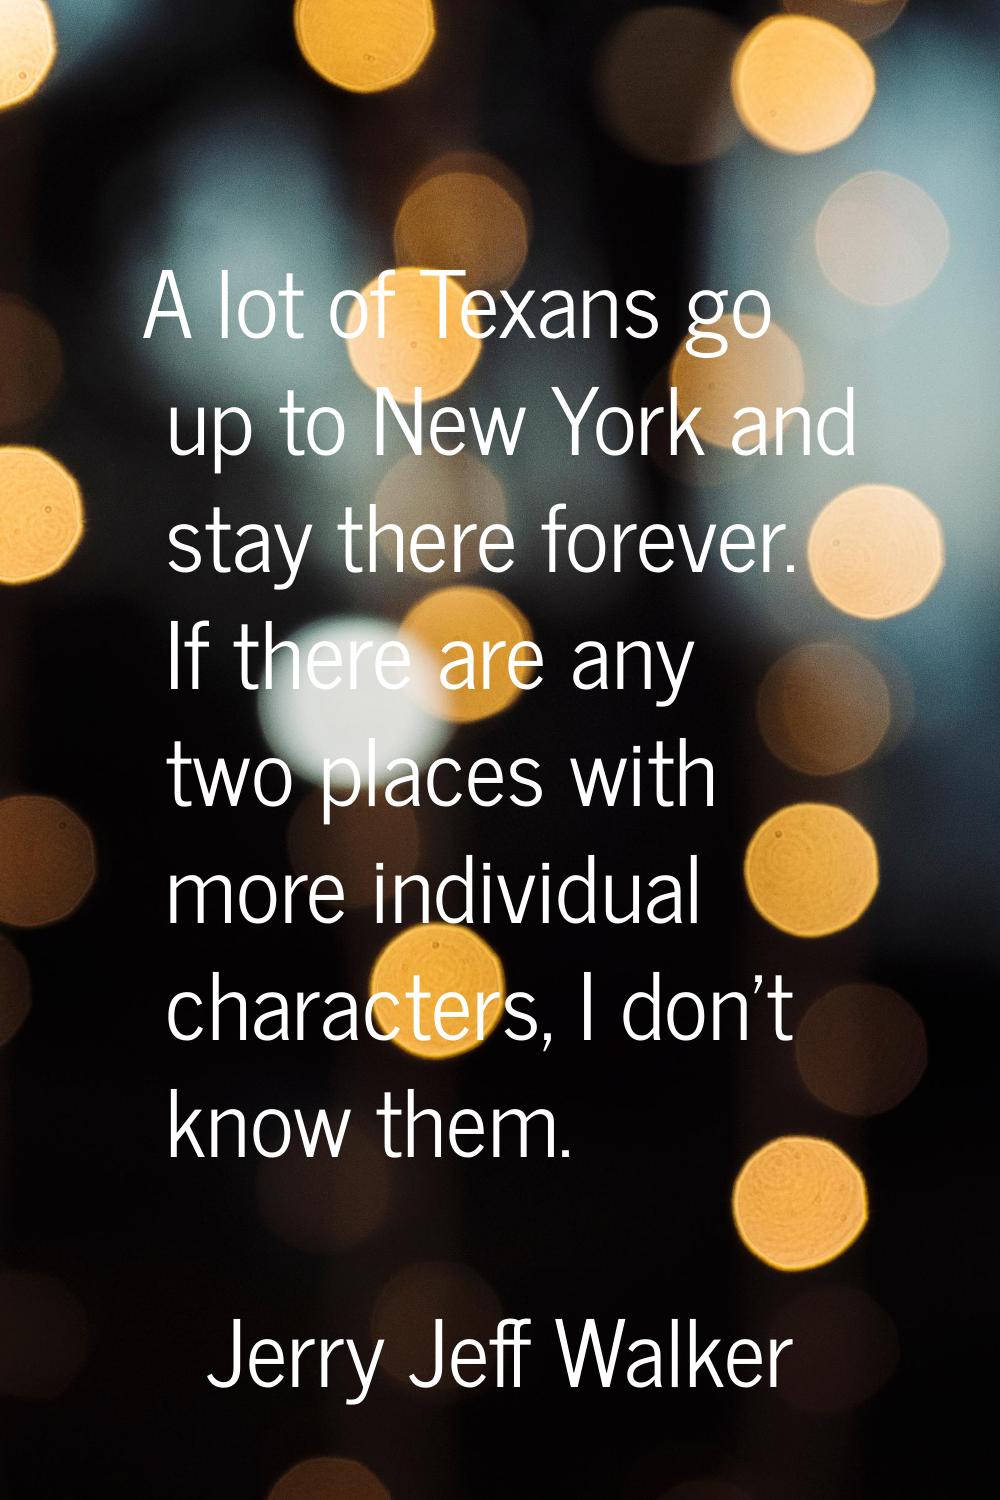 A lot of Texans go up to New York and stay there forever. If there are any two places with more ind